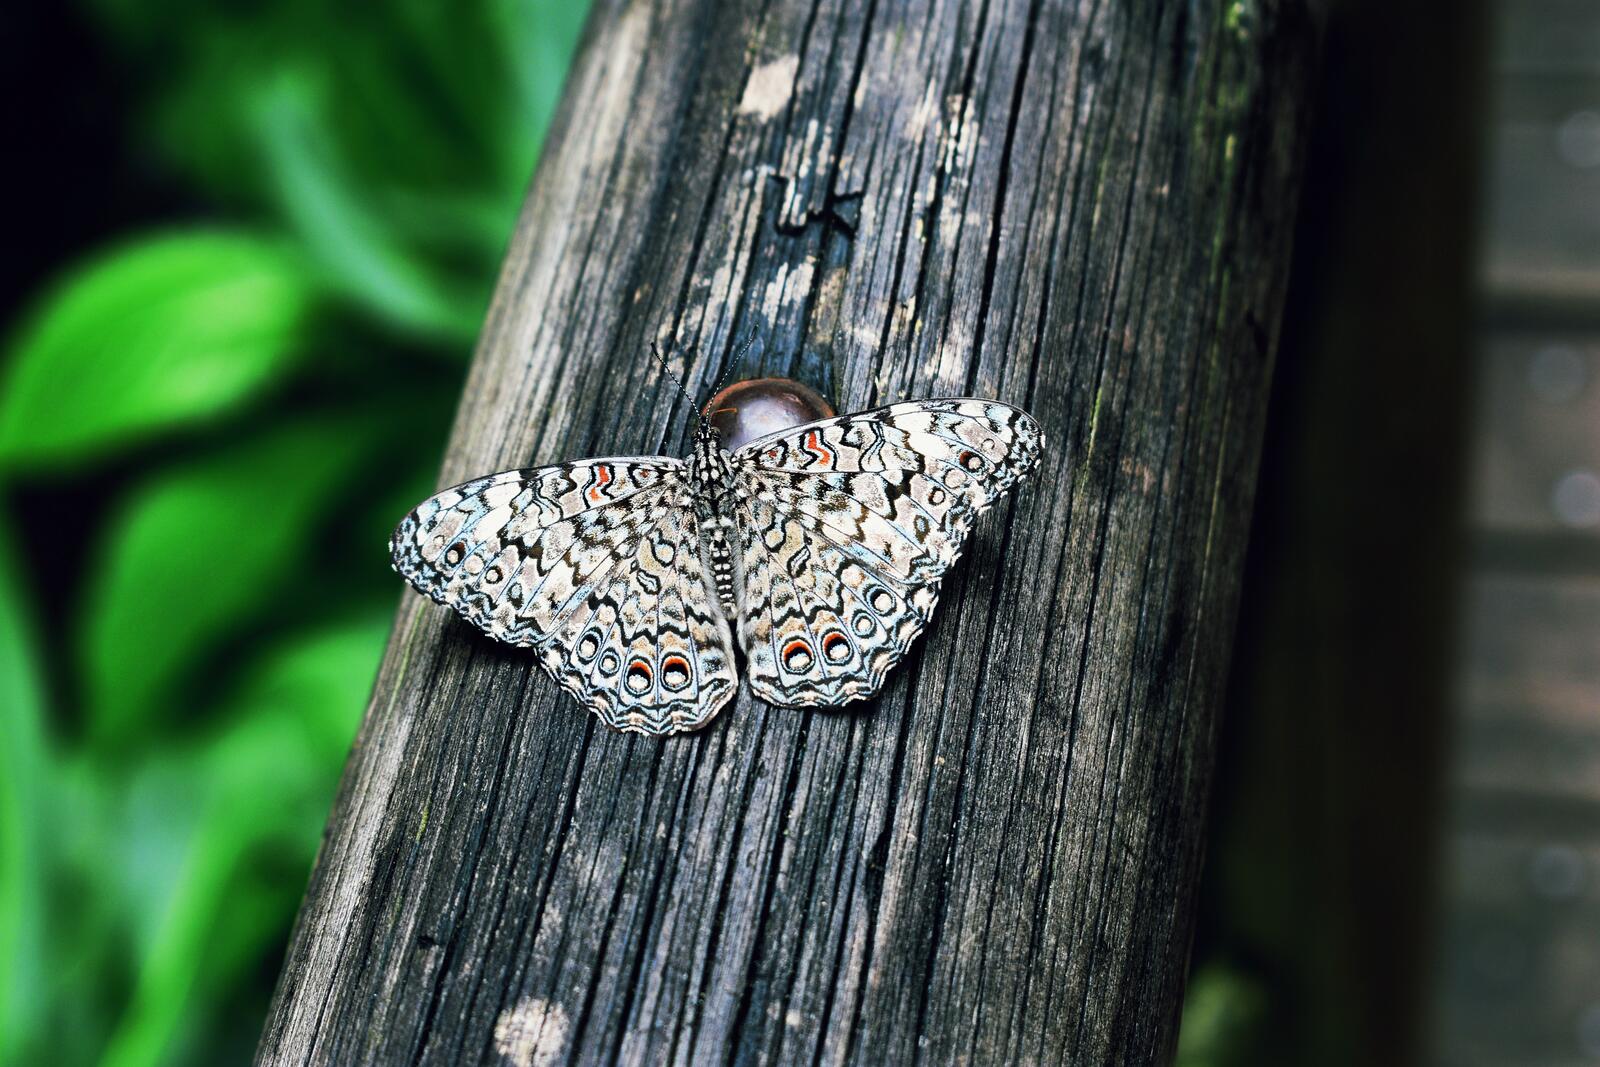 Free photo A white butterfly with a beautiful pattern on its wings sits on a wooden log